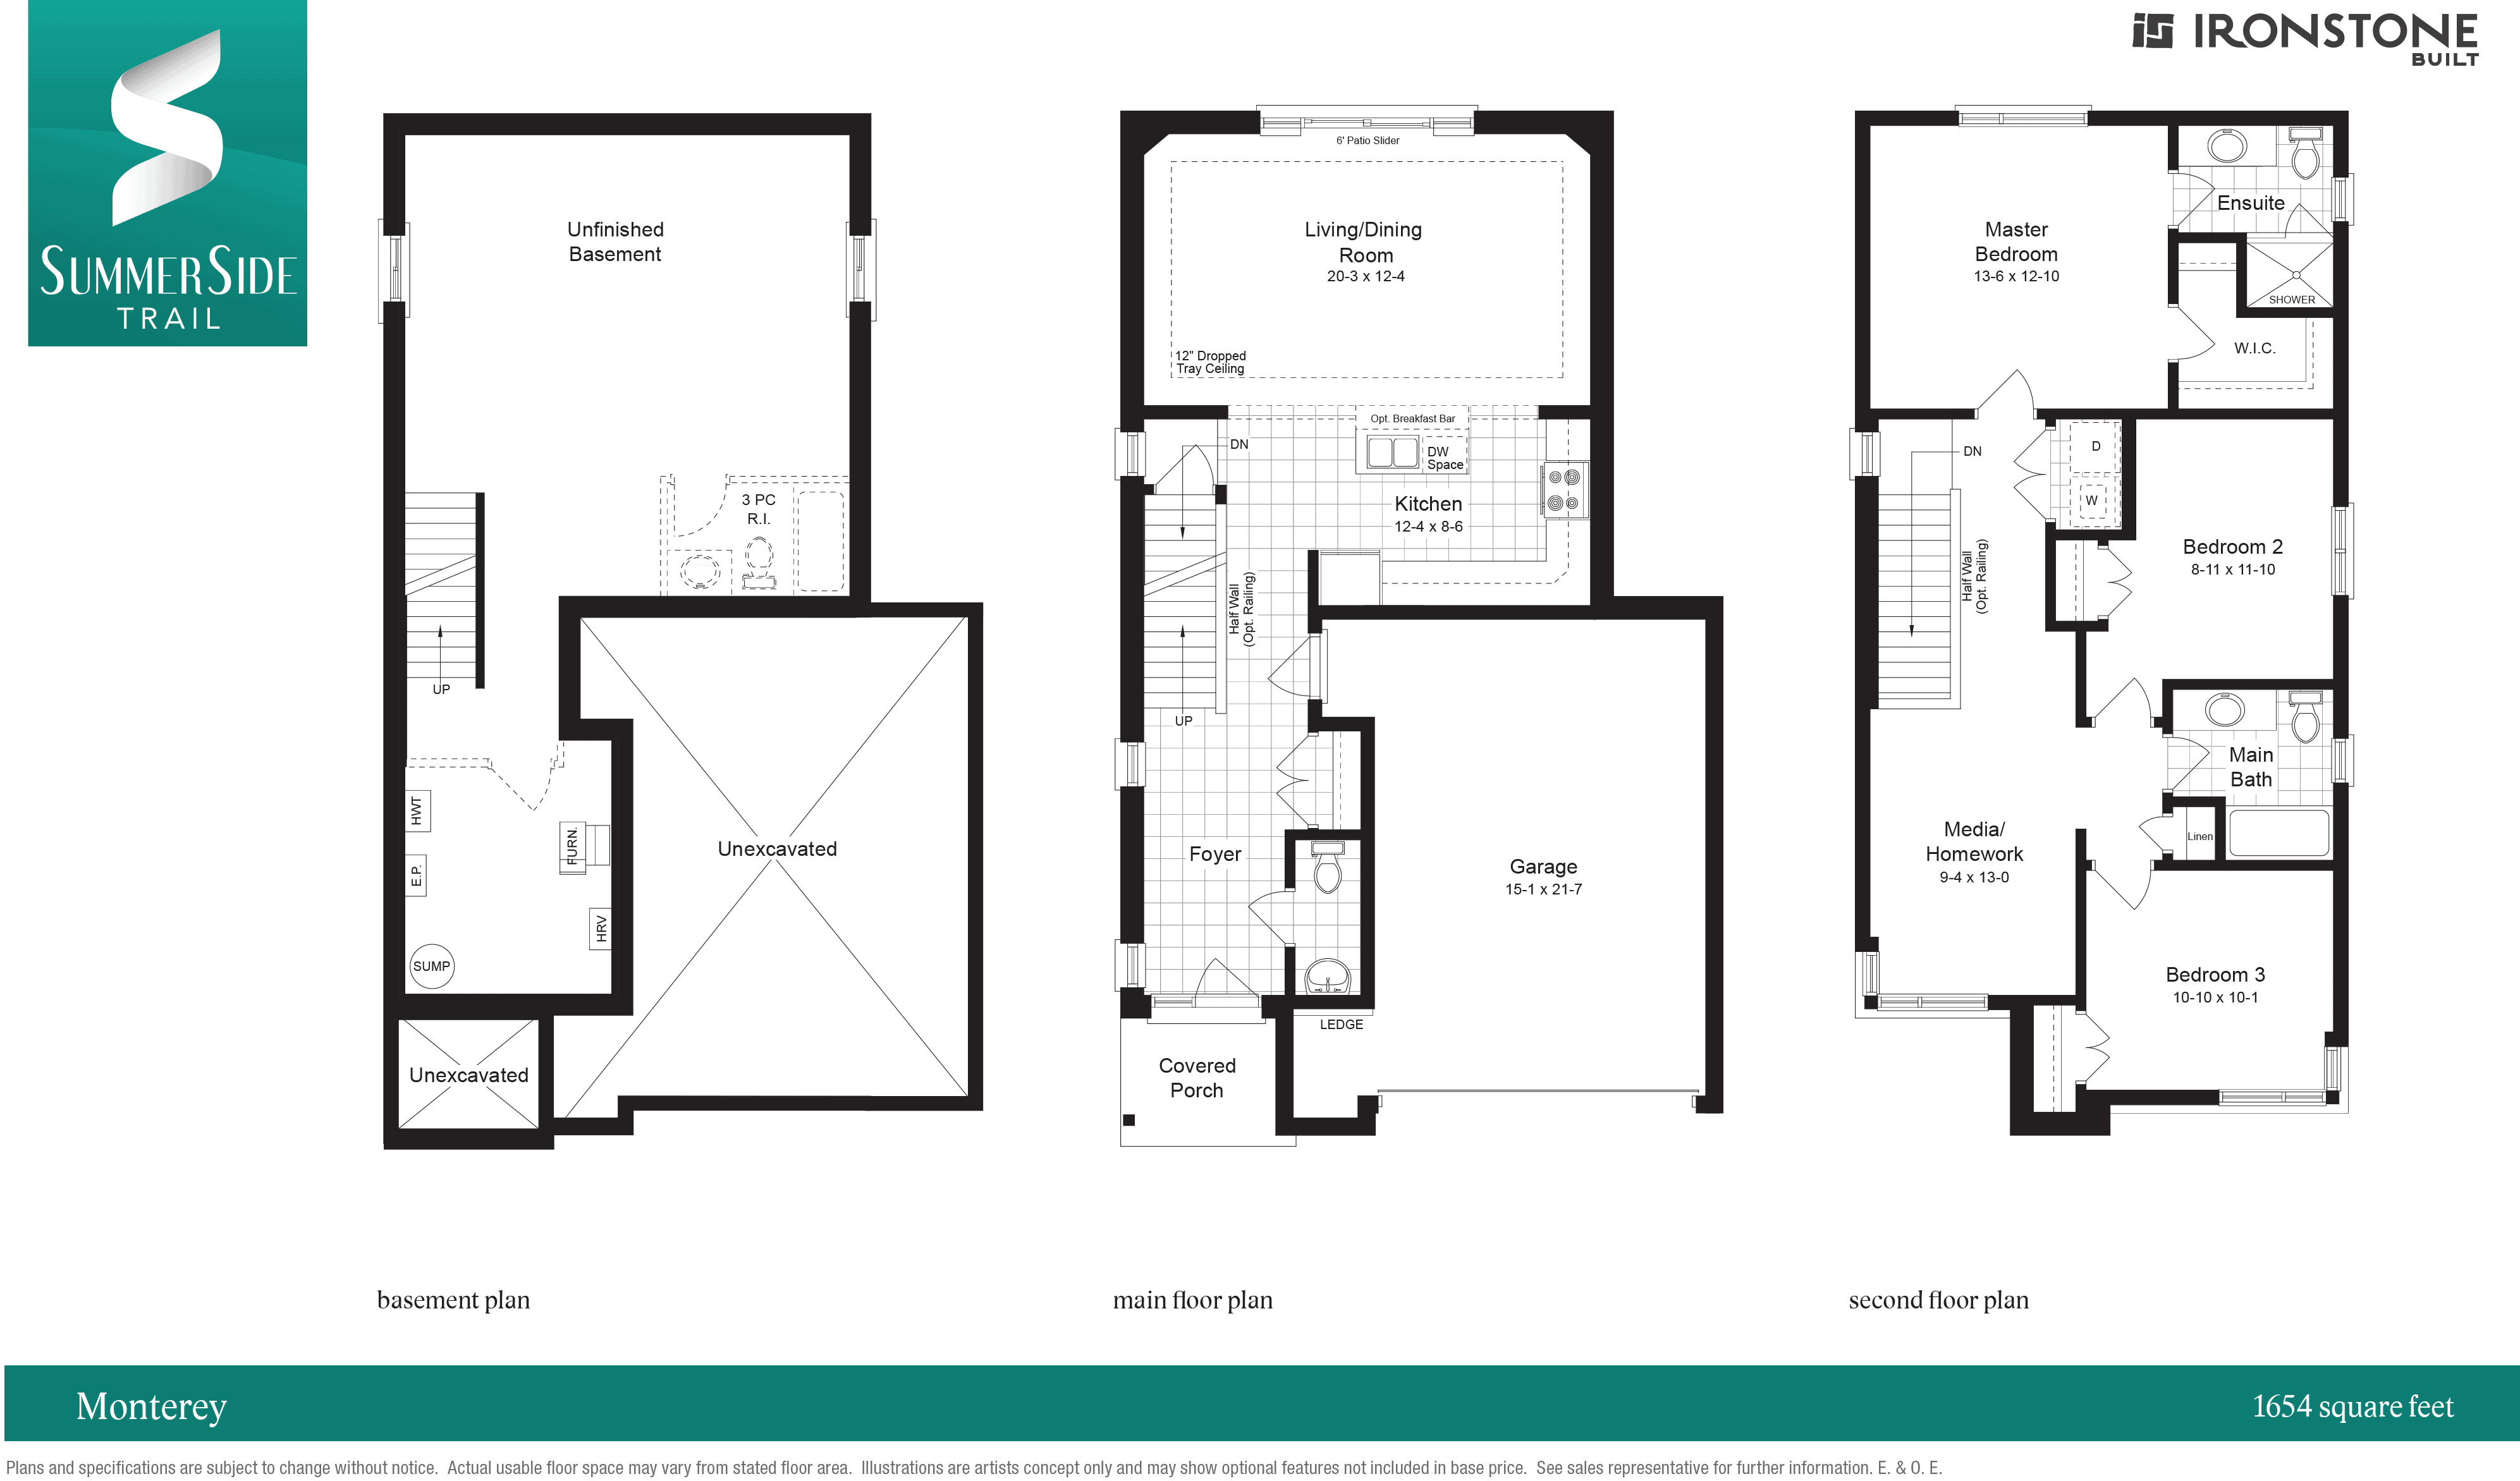  2116 Evans Blvd  Floor Plan of Summerside Trail with undefined beds